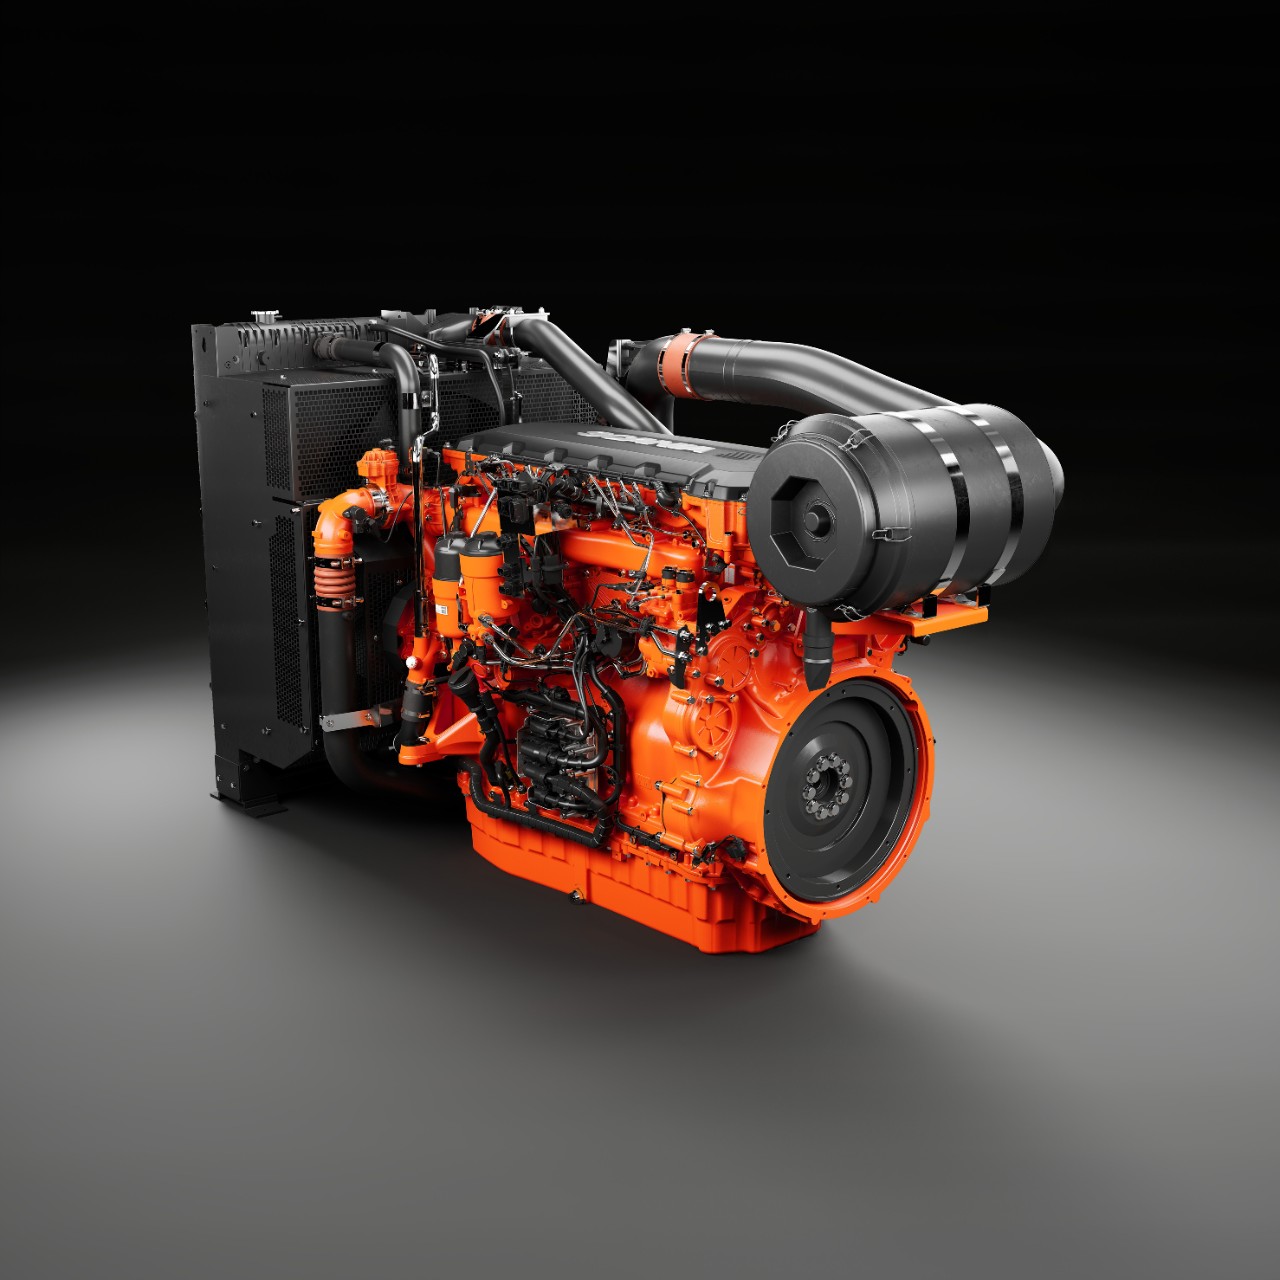 Scania Power Solutions launches its next generation inline engine platform